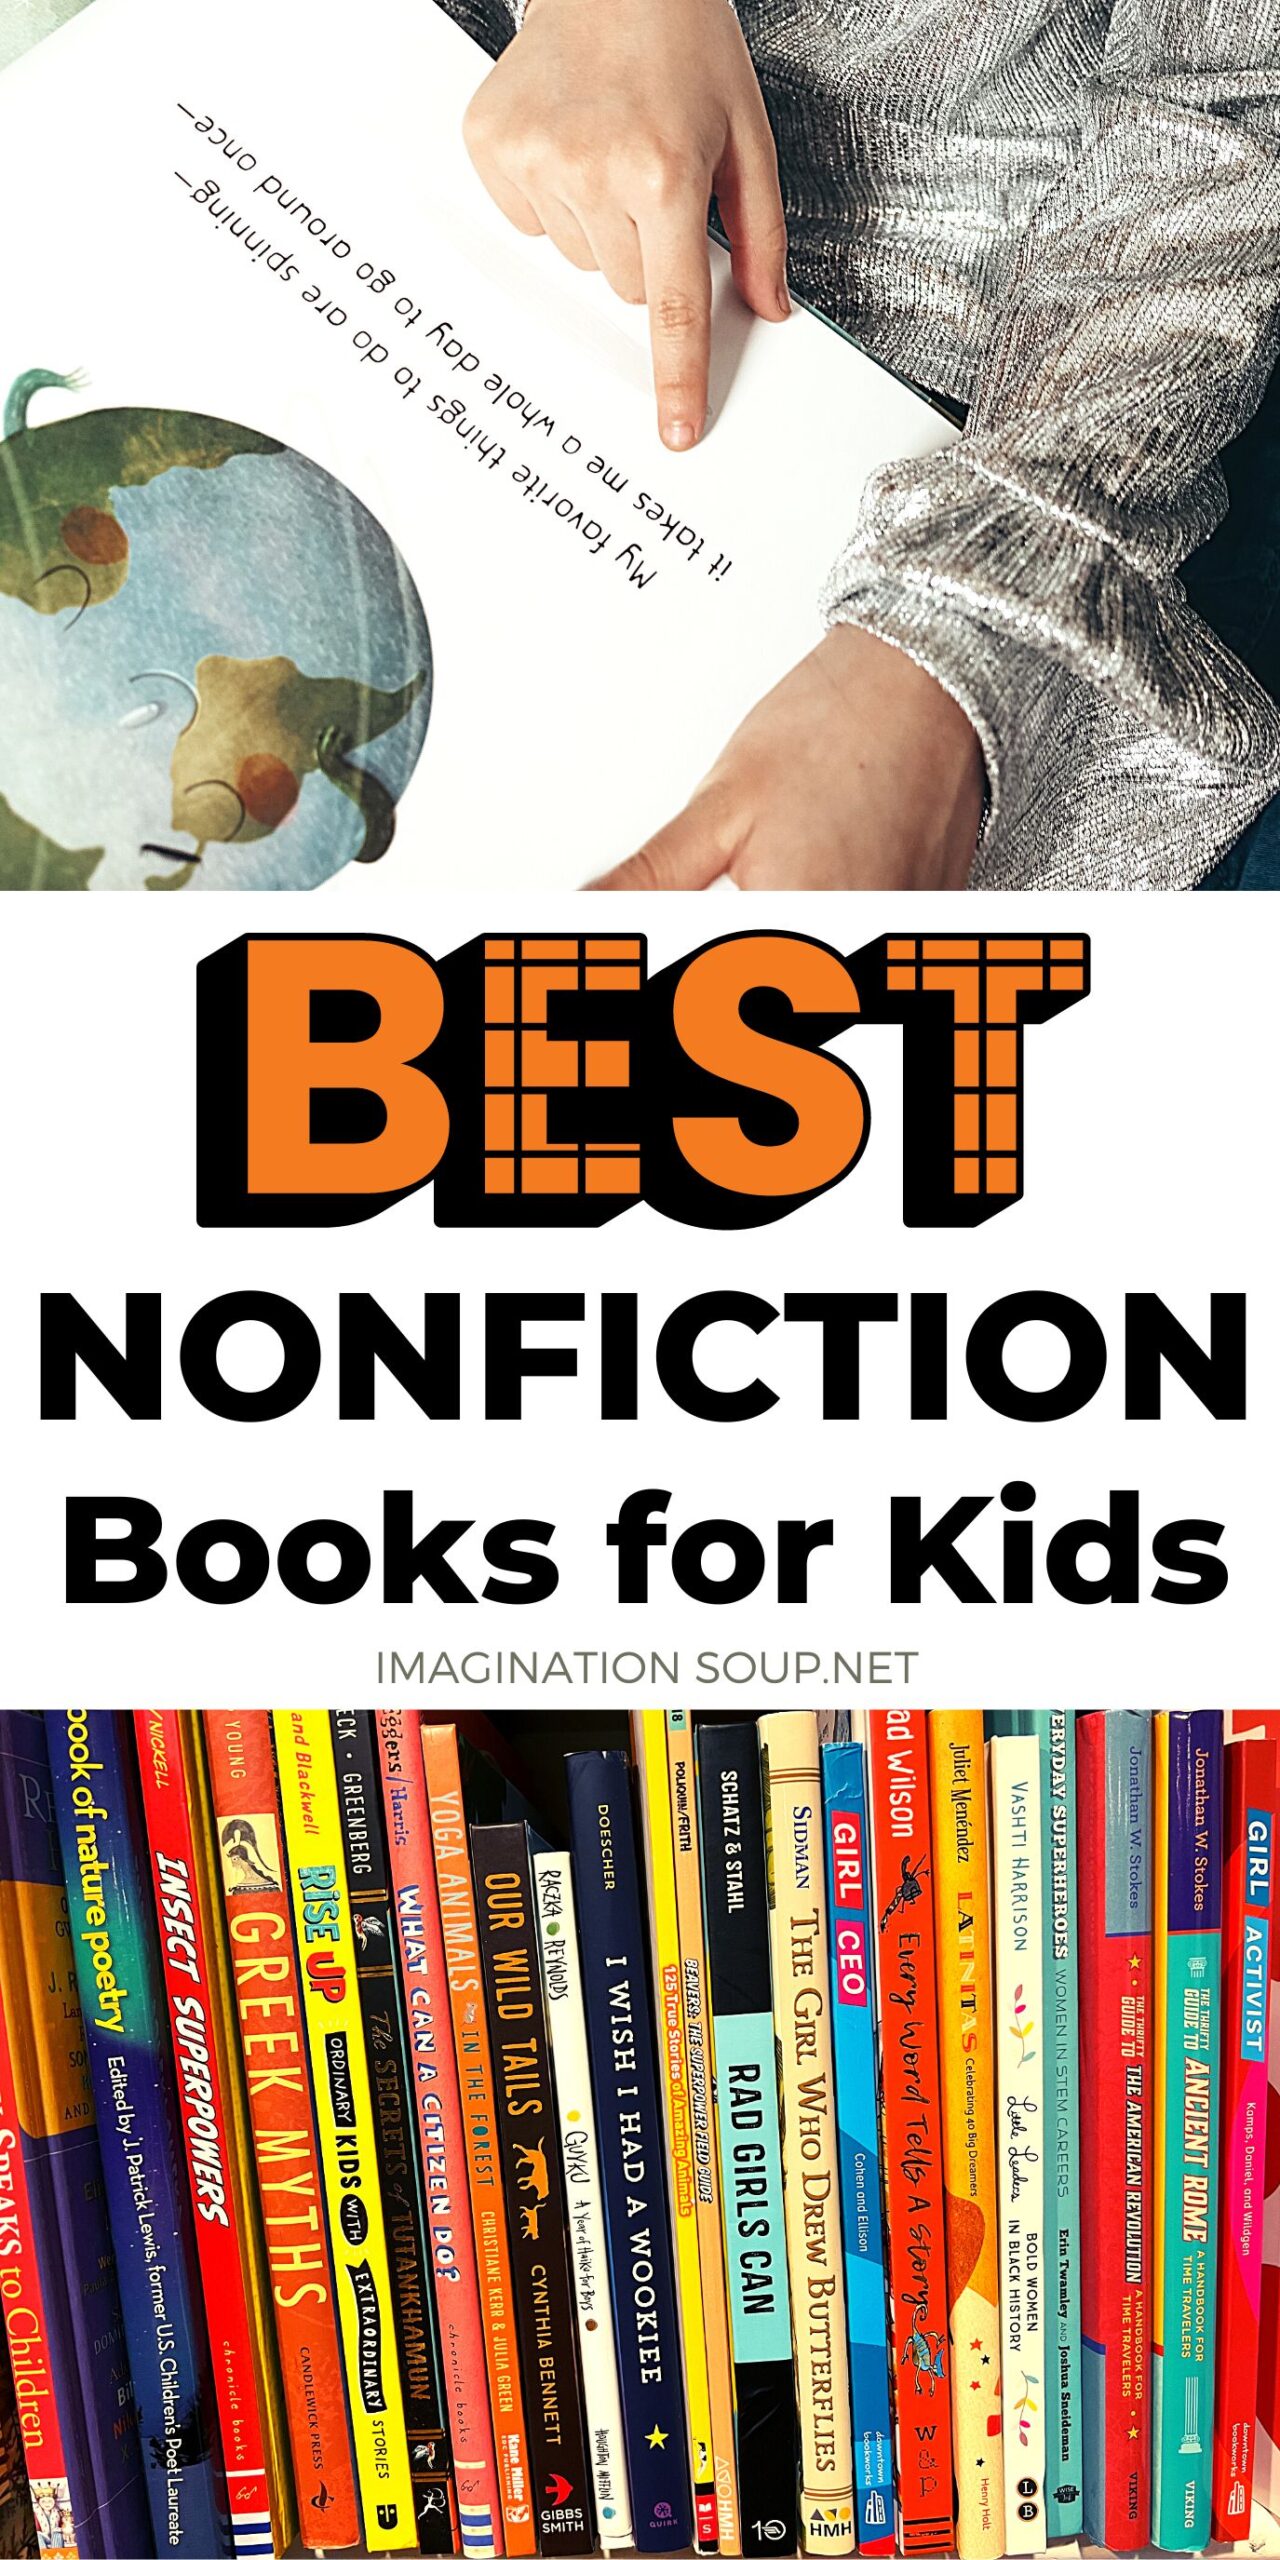 With so many nonfiction books for kids, how do you pick the best ones for your young readers? If you're looking for the best nonfiction books for kids, these lists will give you the best of the informational children's books published with reviews so that you can engage and educate readers.